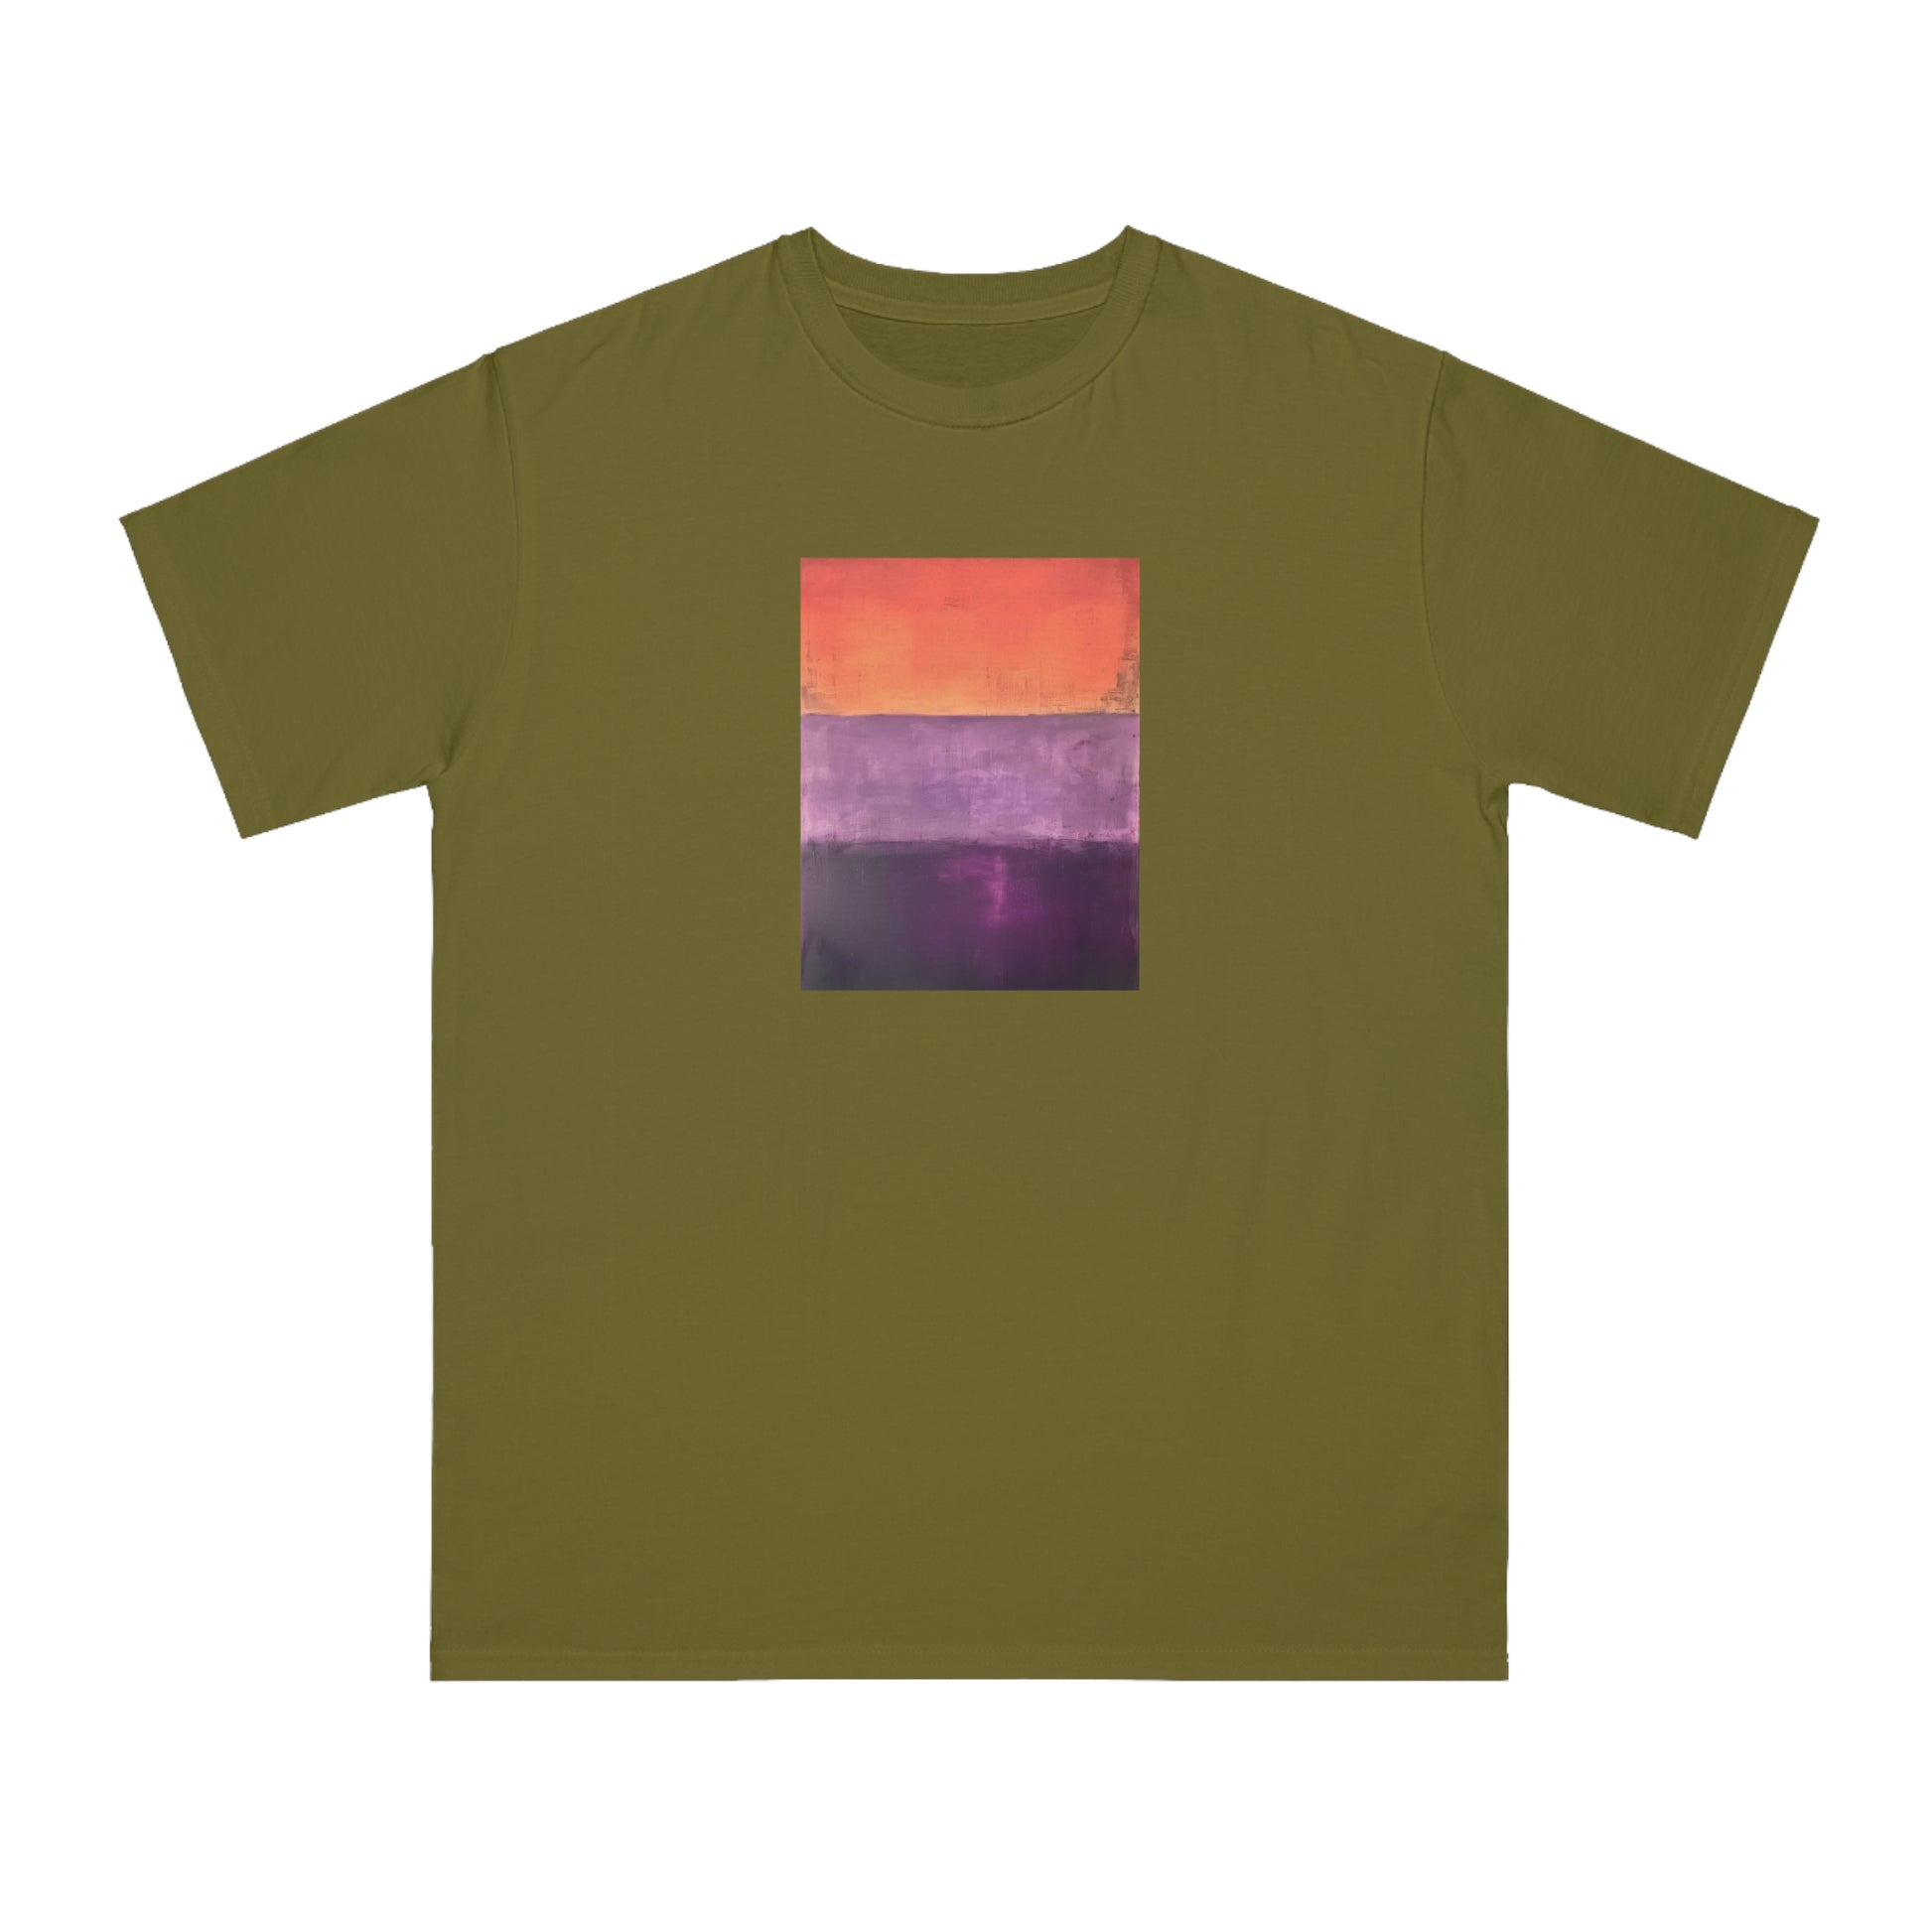 a green t - shirt with an orange and purple painting on it